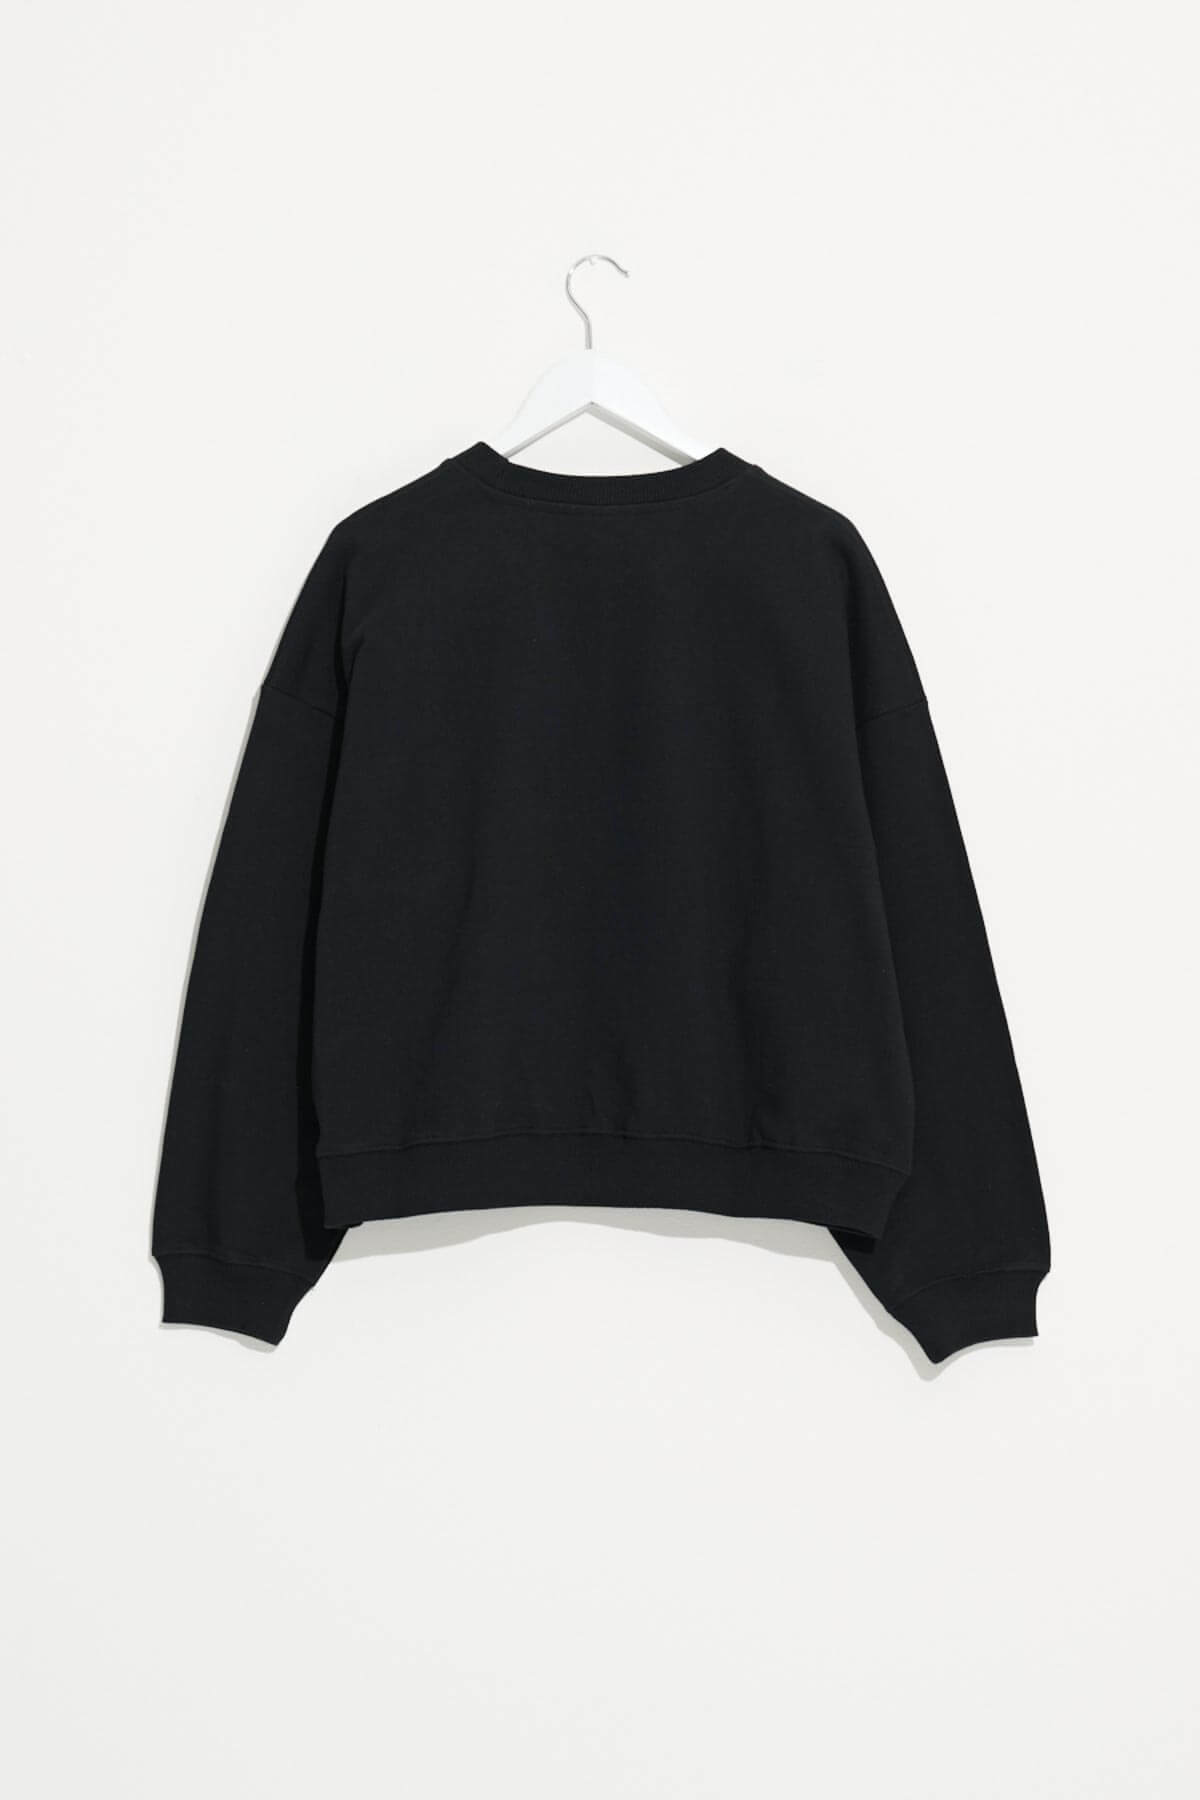 Misfit Shapes - Very Hungry Cropped Crew - Black